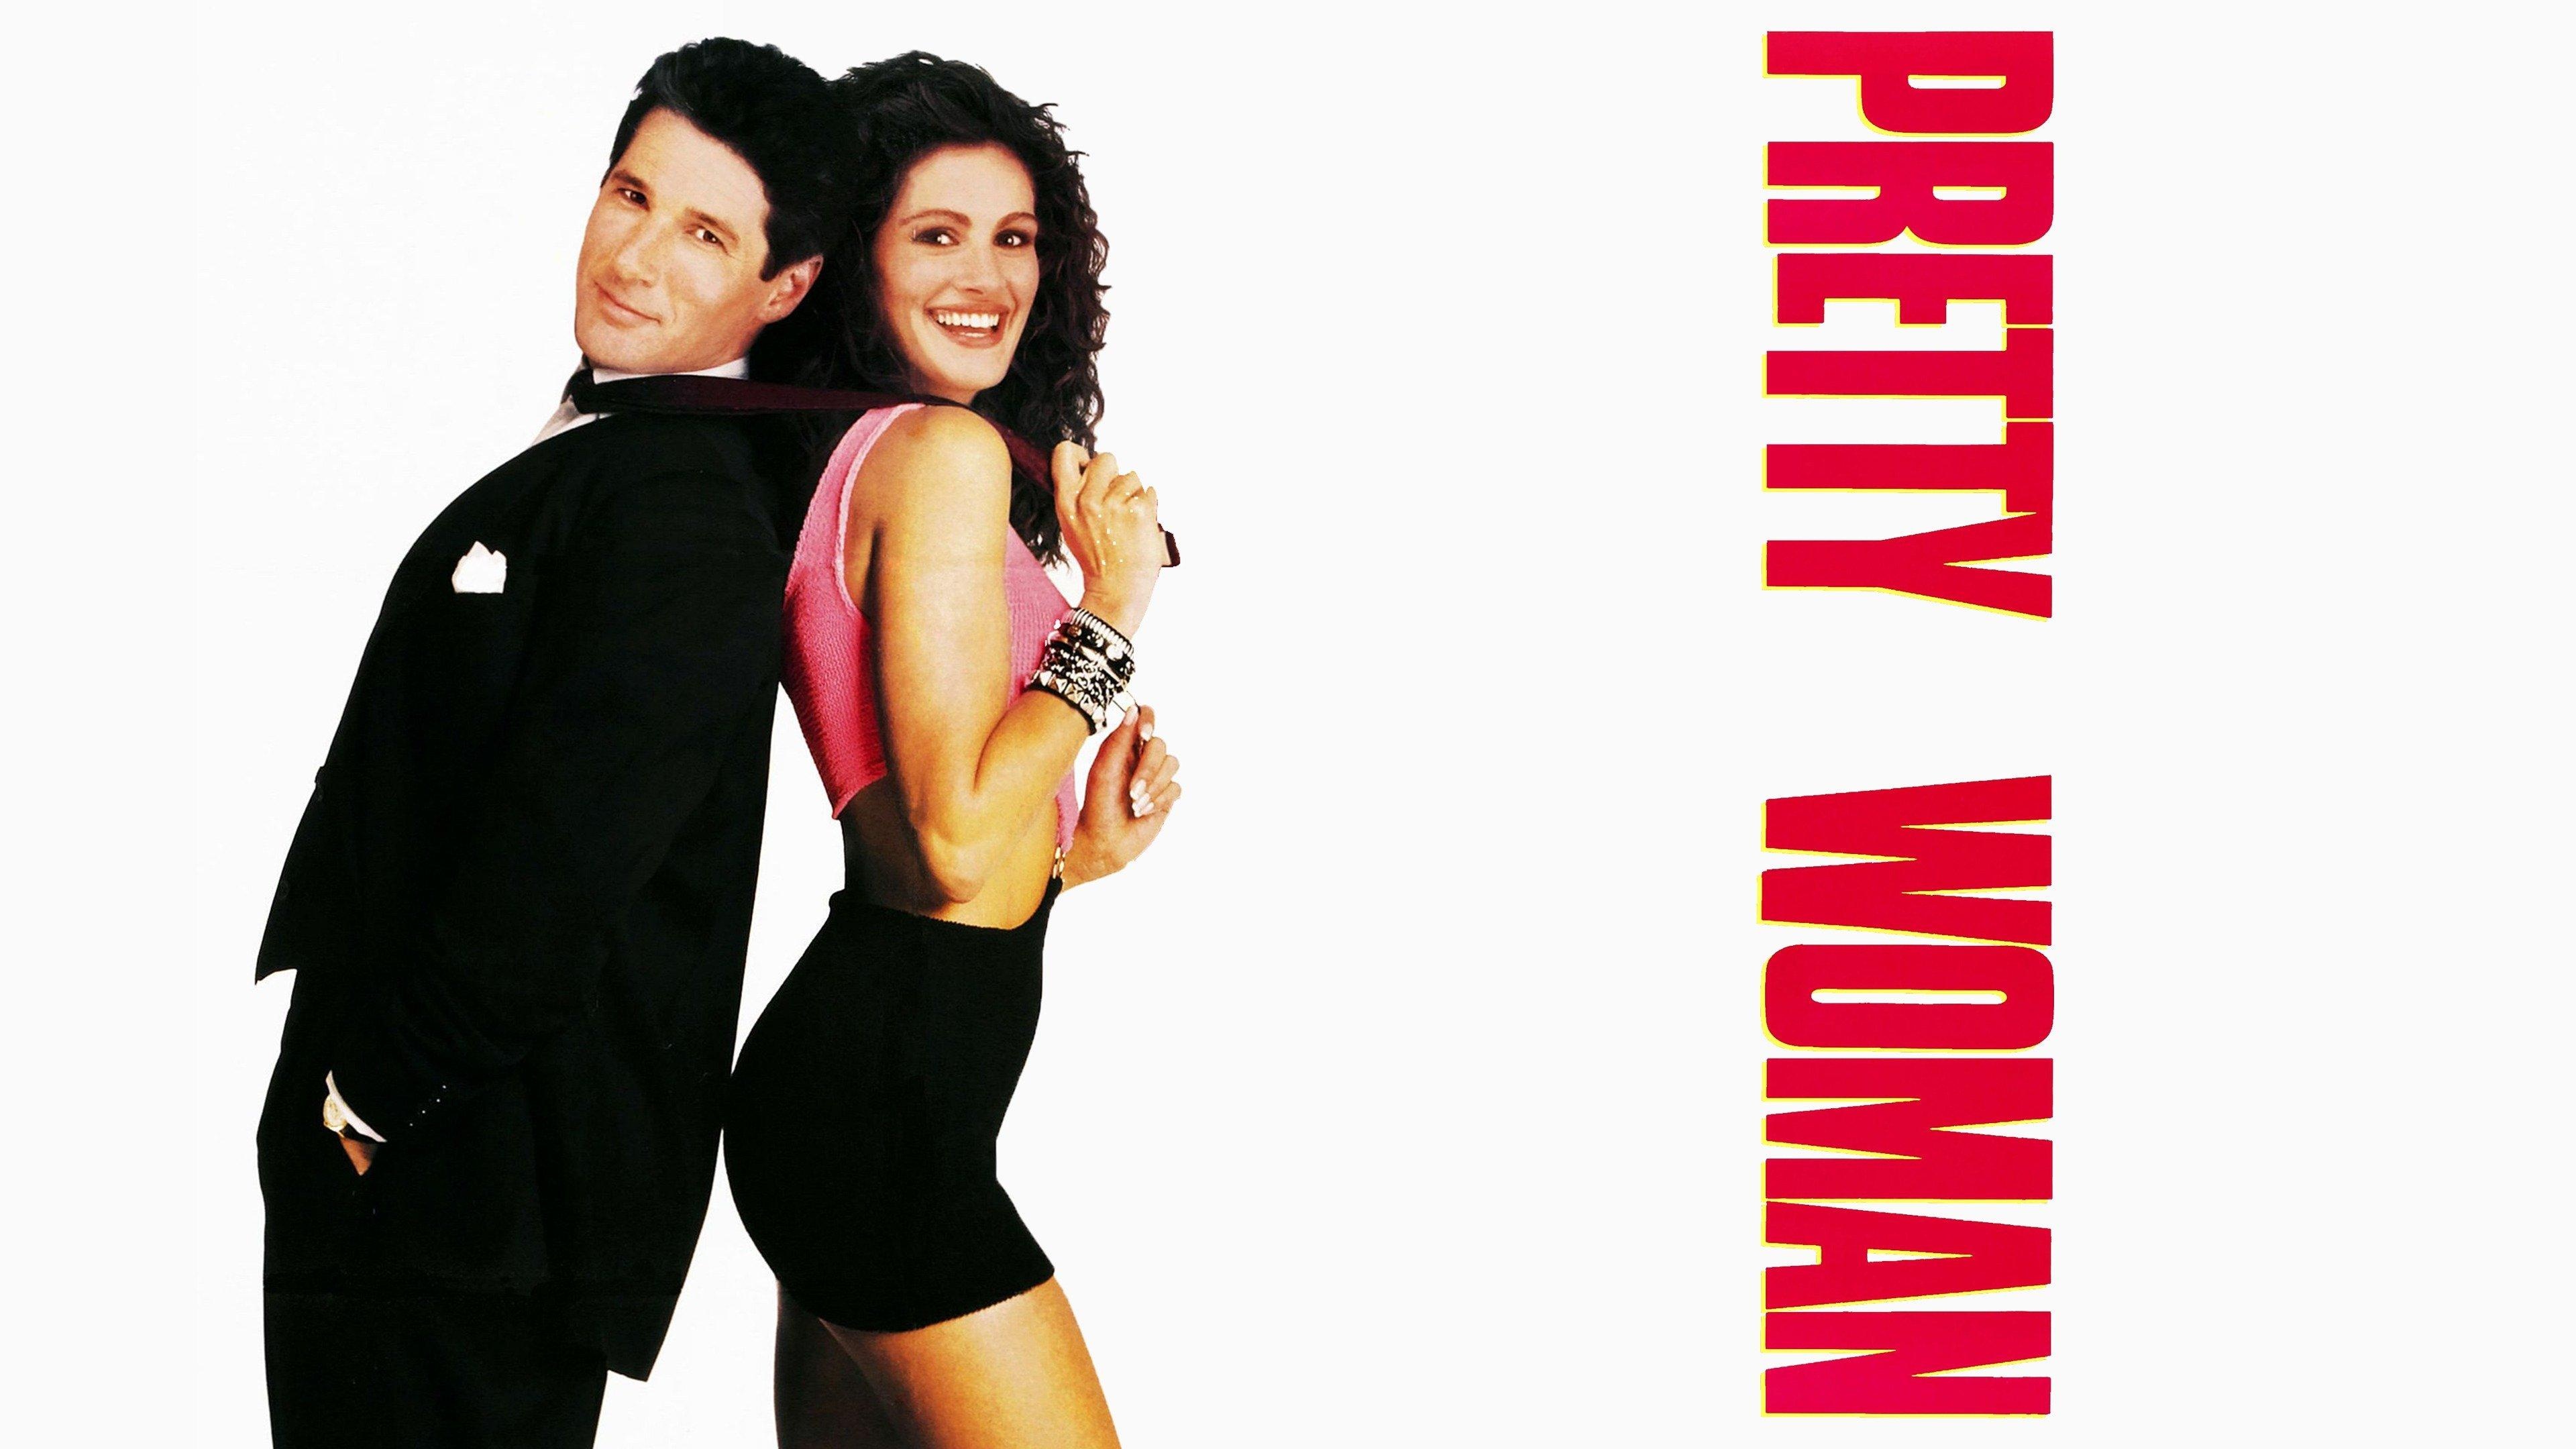 Pretty Woman (Movie): Directed by Garry Marshall, from a screenplay by J. F. Lawton. 3840x2160 4K Background.